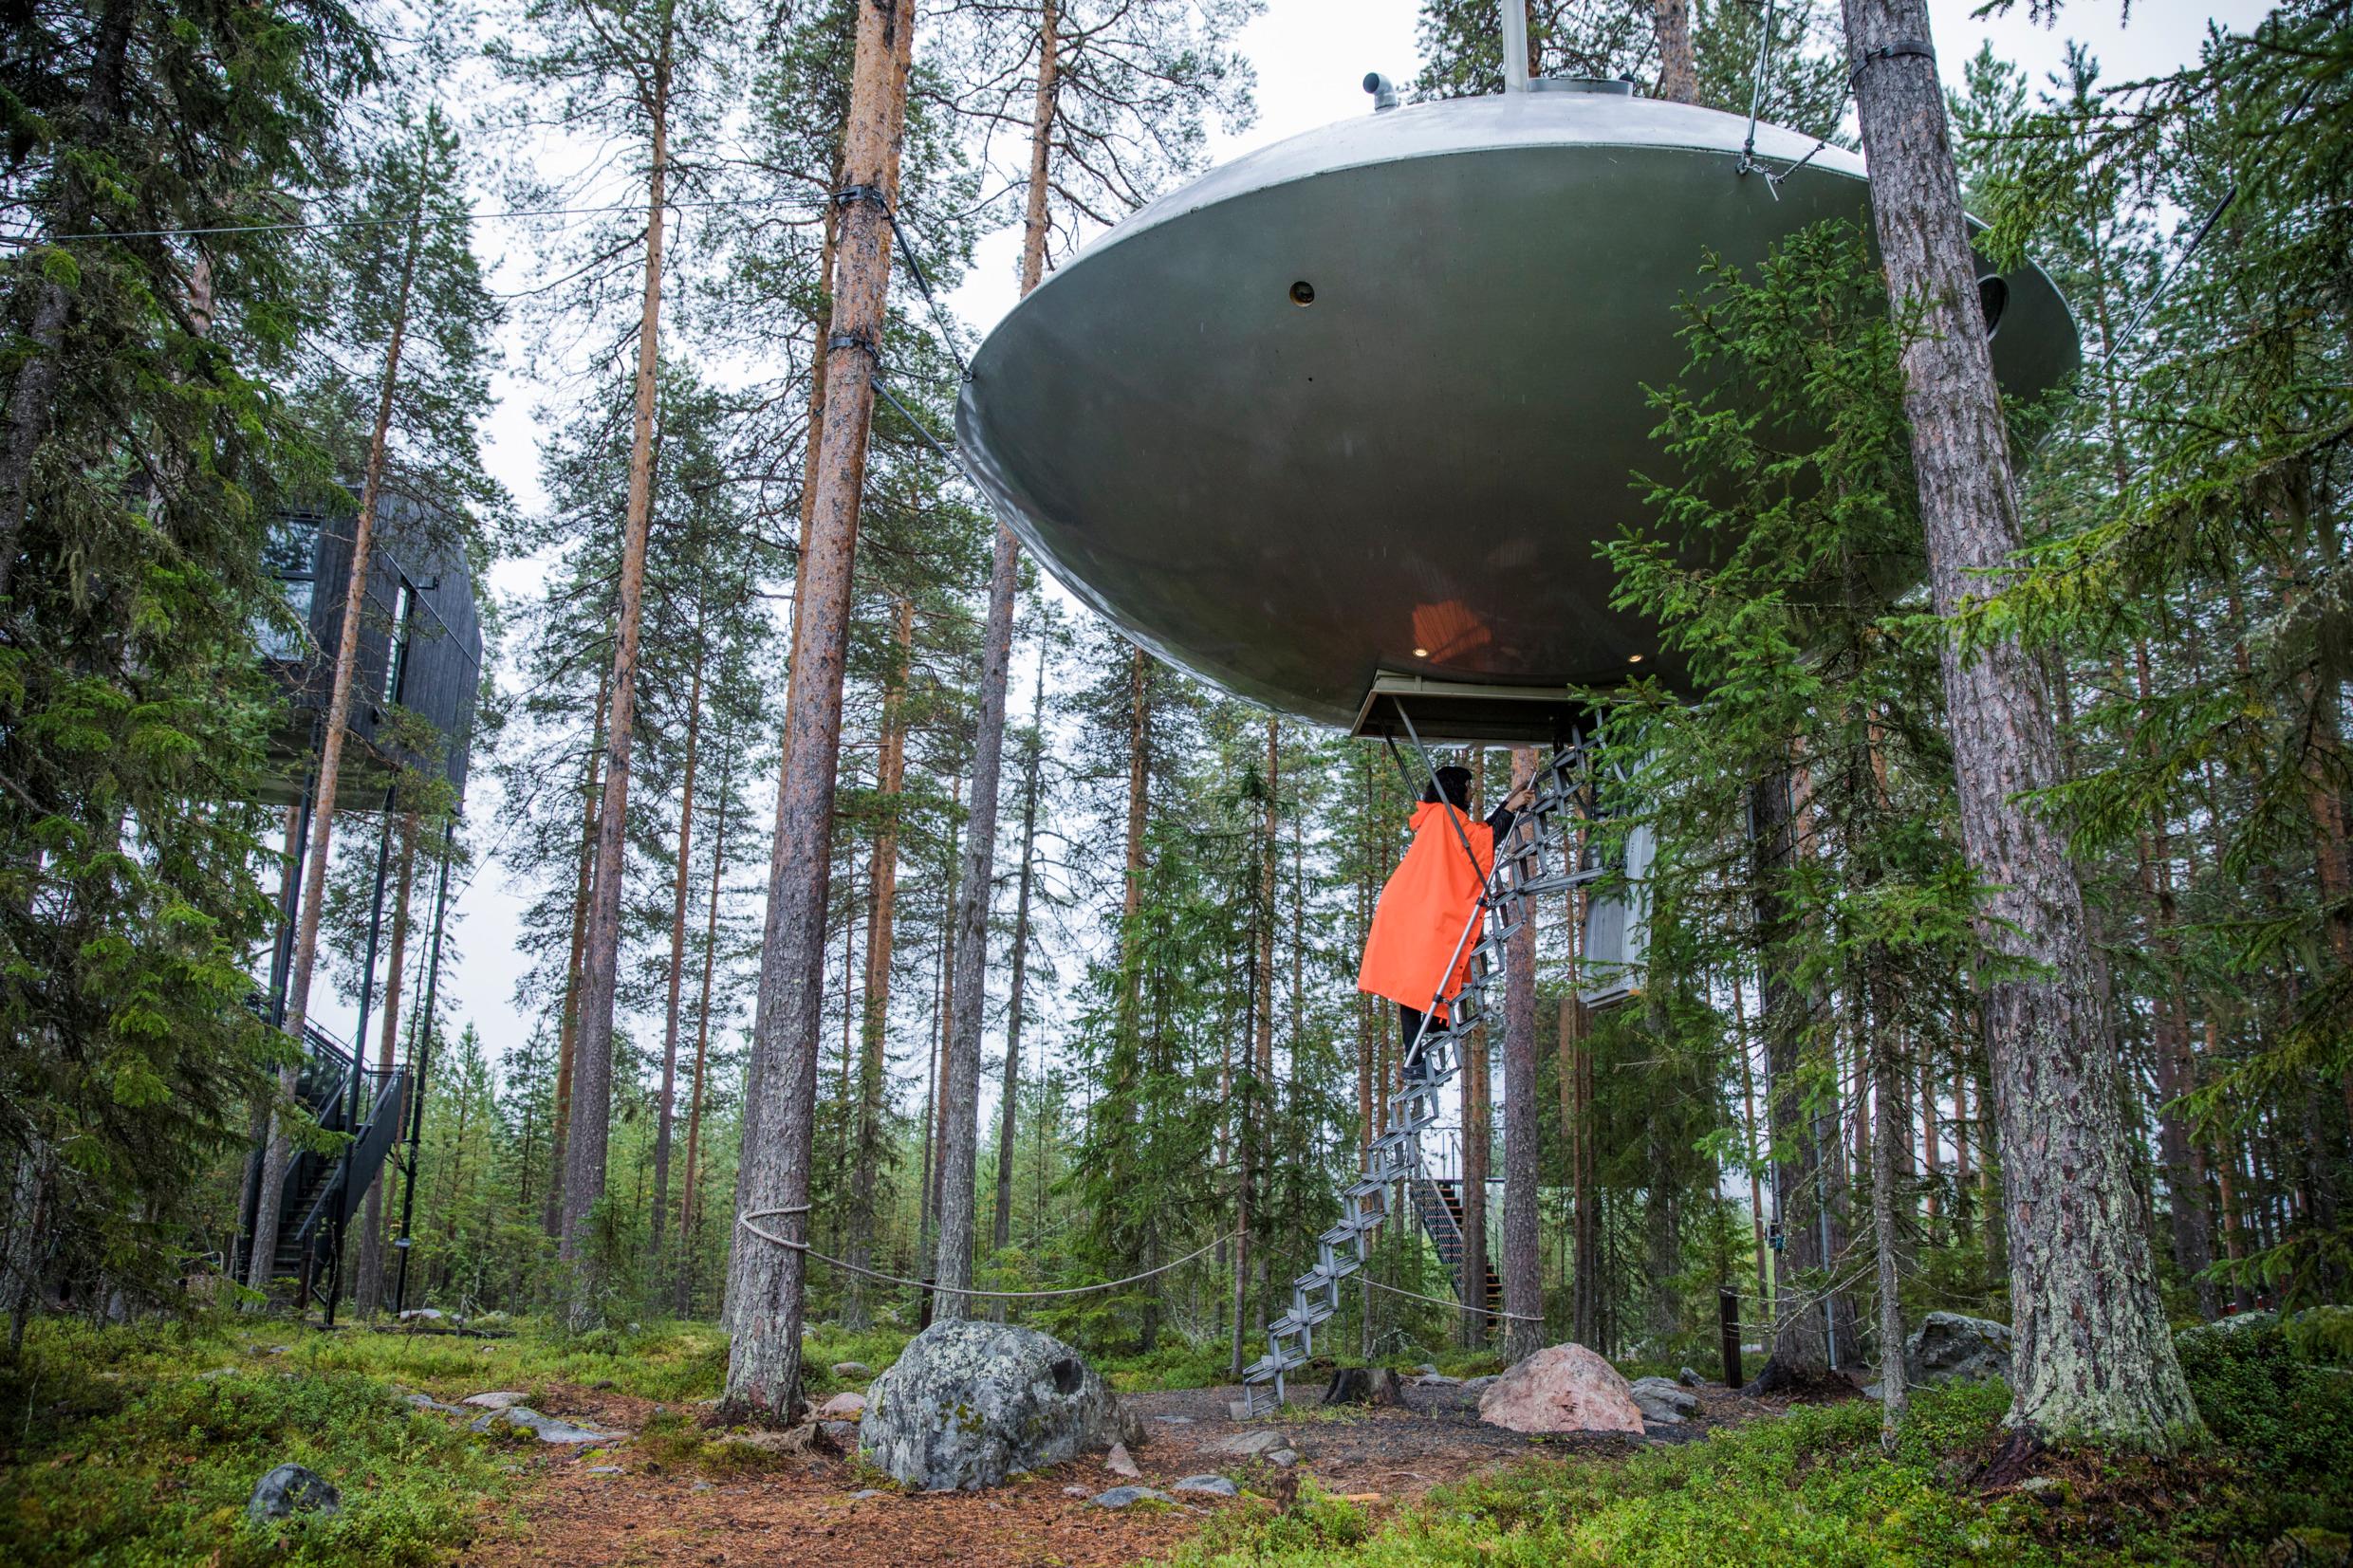 A woman climbs up a ladder to a tree house designed like a Ufo located in the pine tree tops, in a forest in Swedish Lapland.